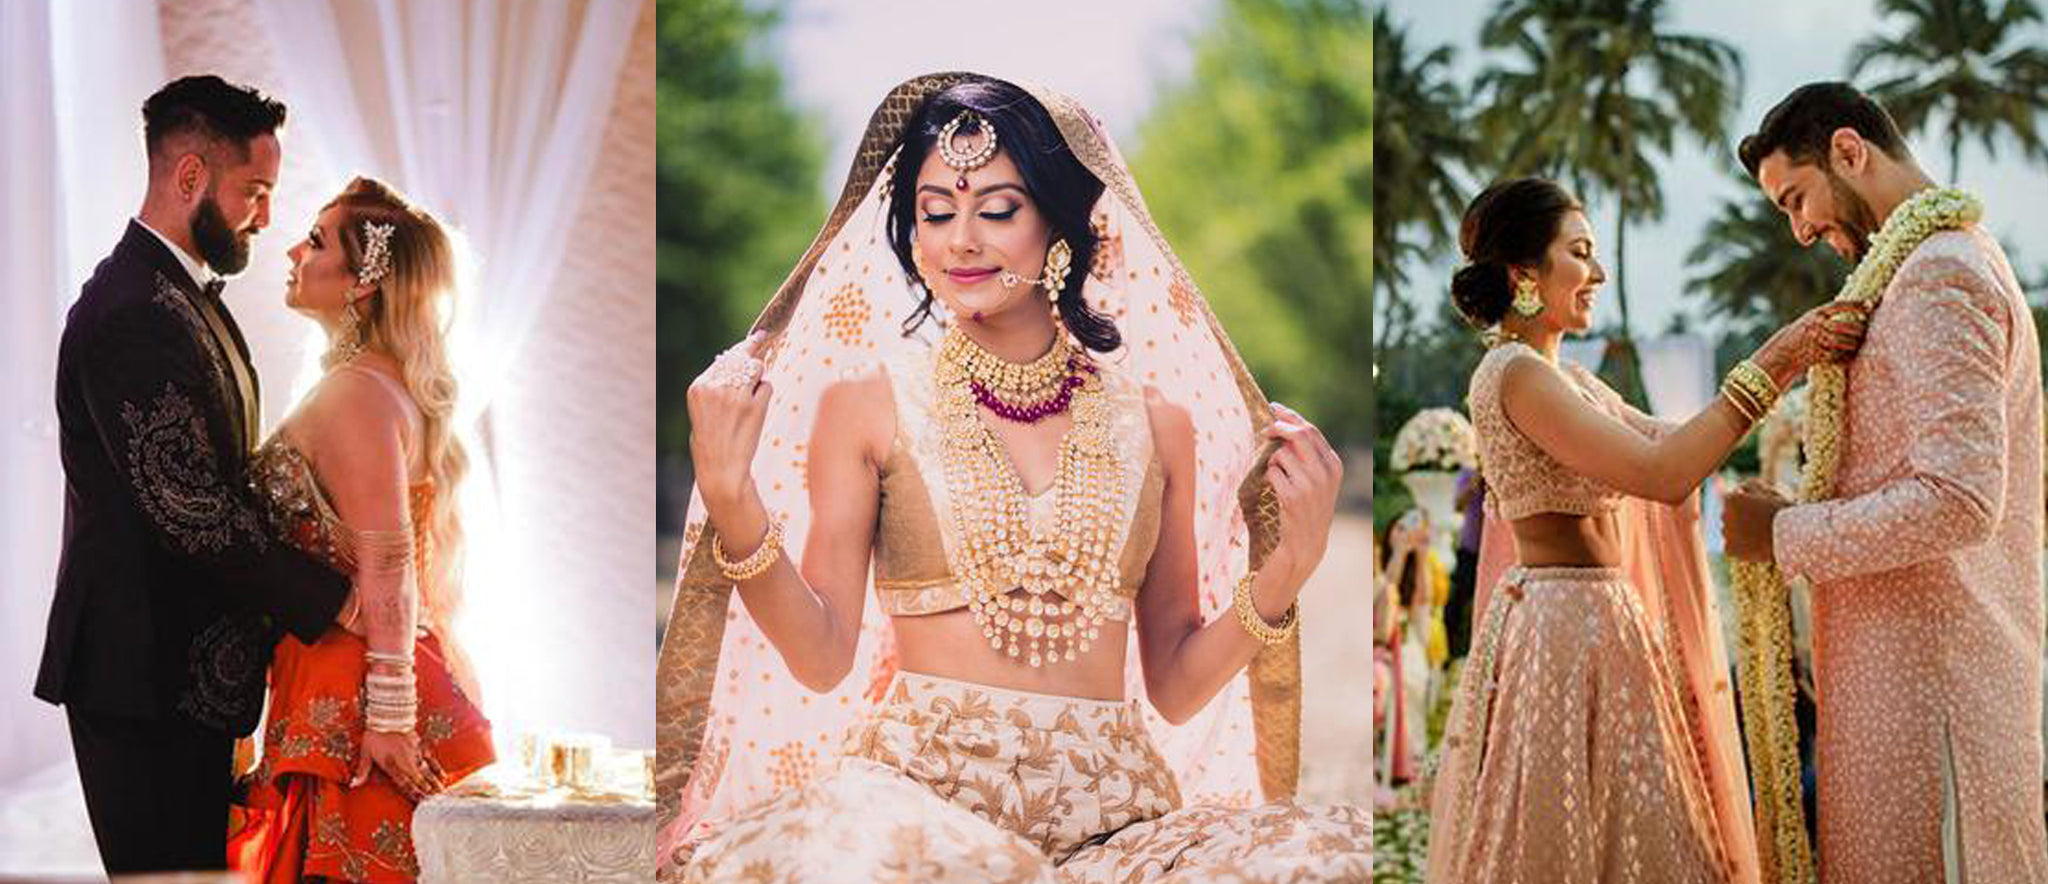 Top Wedding Photographers in Sarila State - Best Pre Wedding Photography -  Justdial